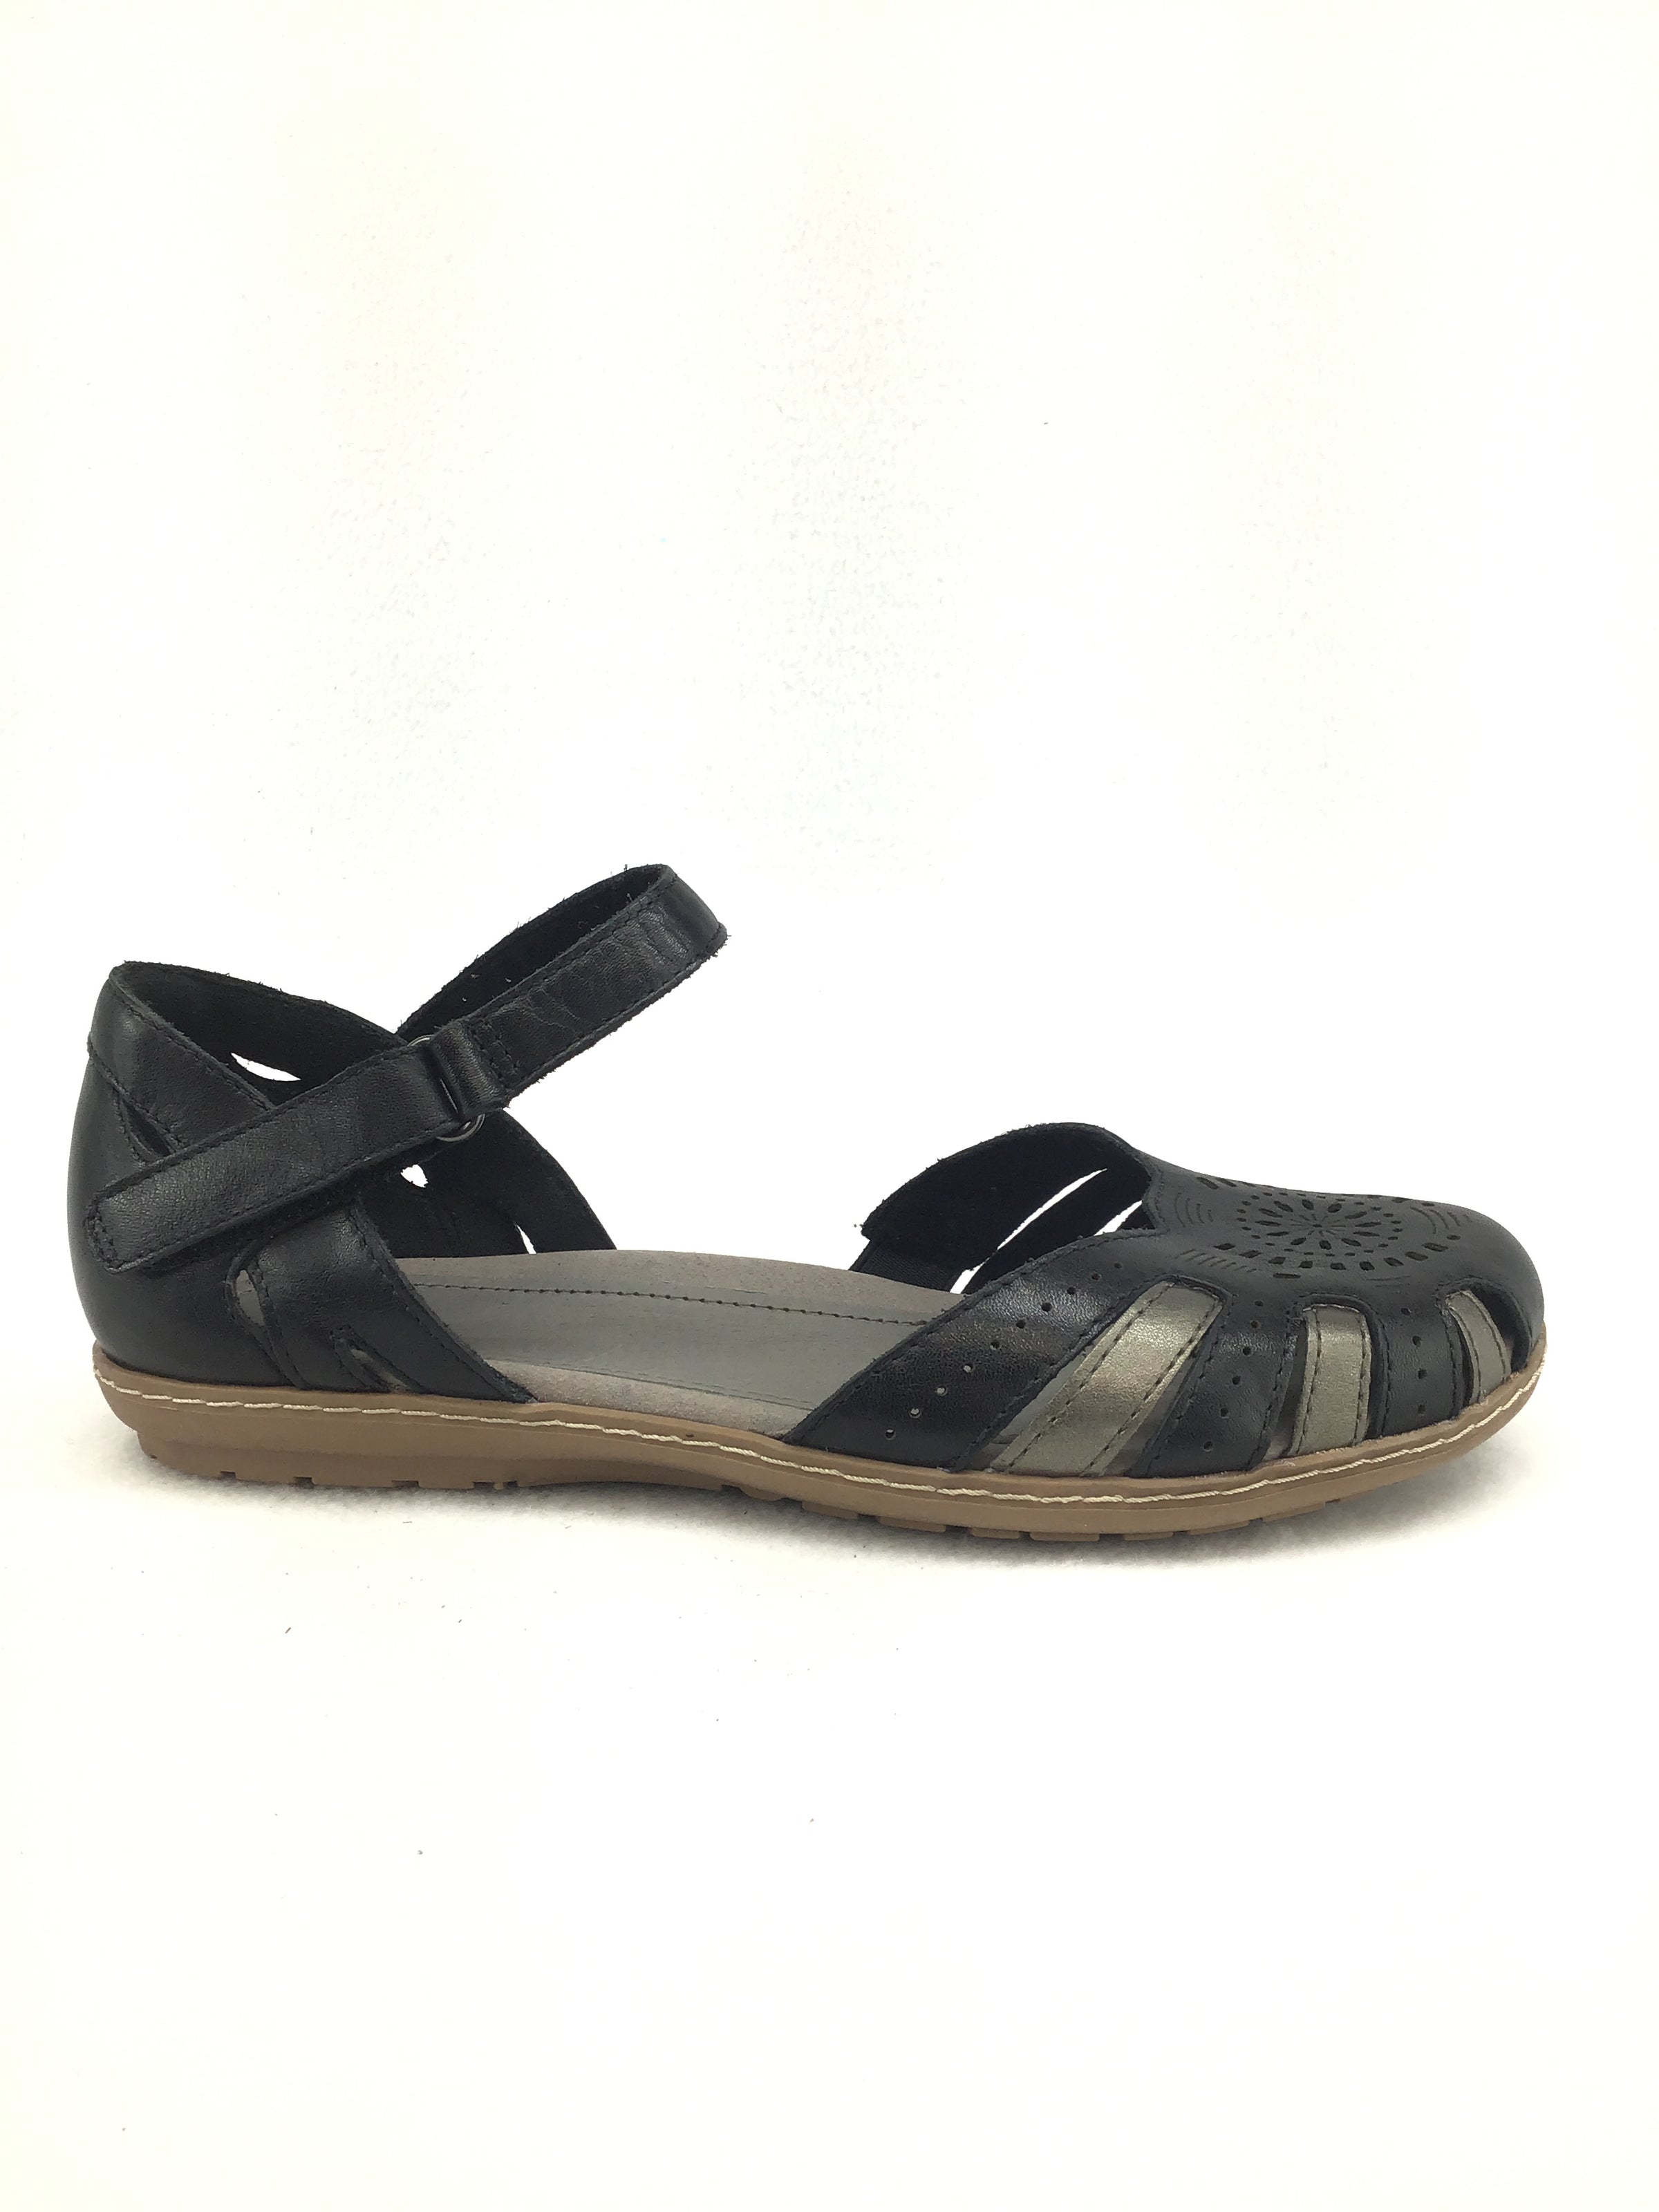 Earth Camellia Cahoon Sandals Size 9M